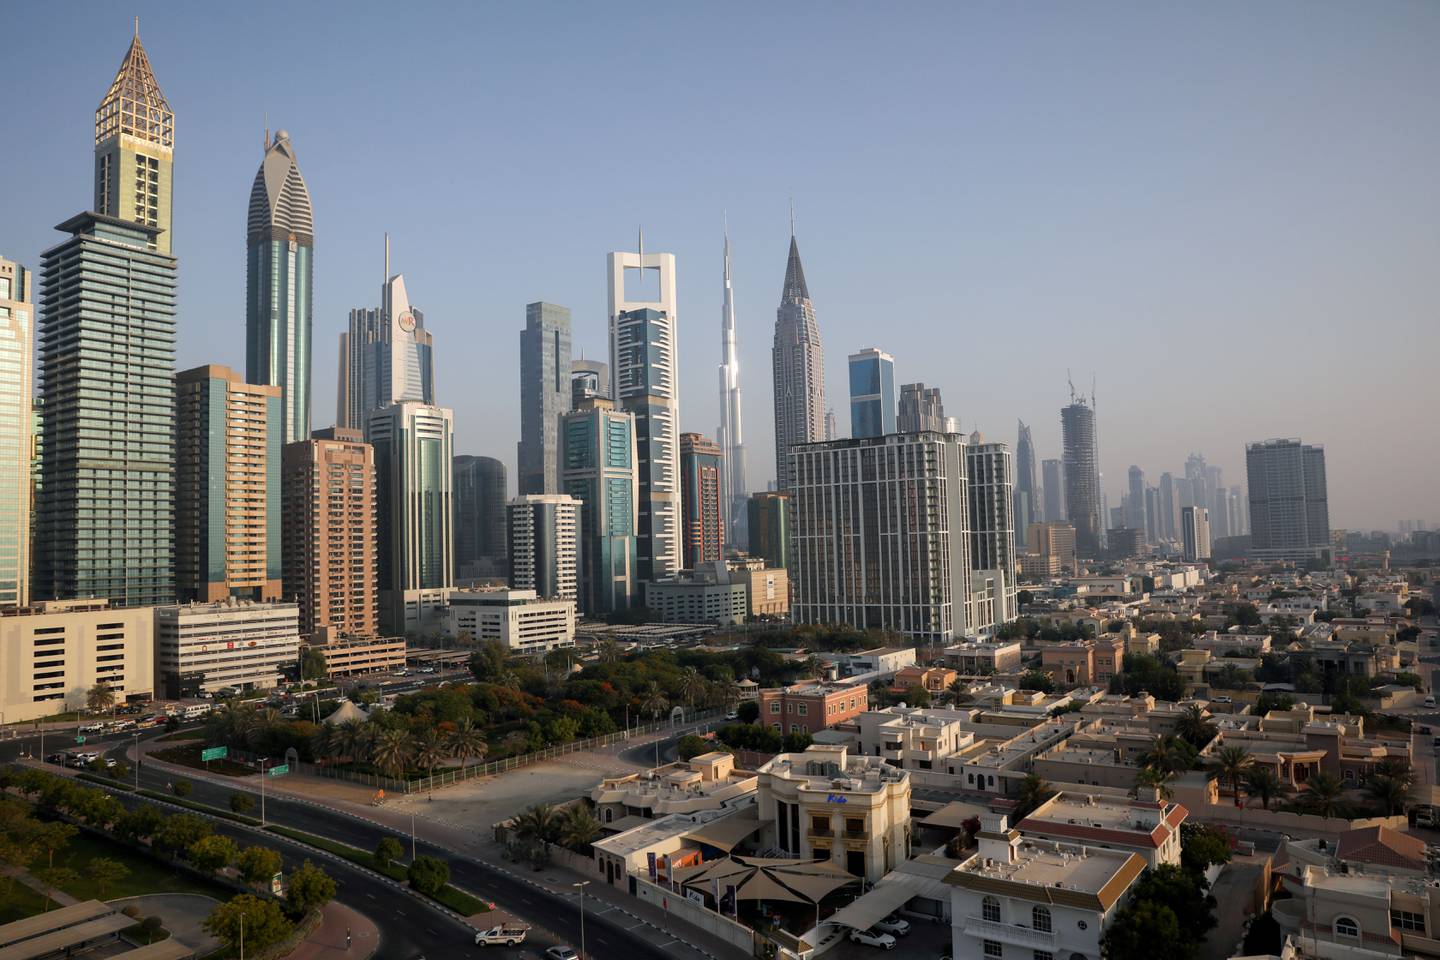 Dubai has been named the world's most resilient city by the United Nations. Reuters